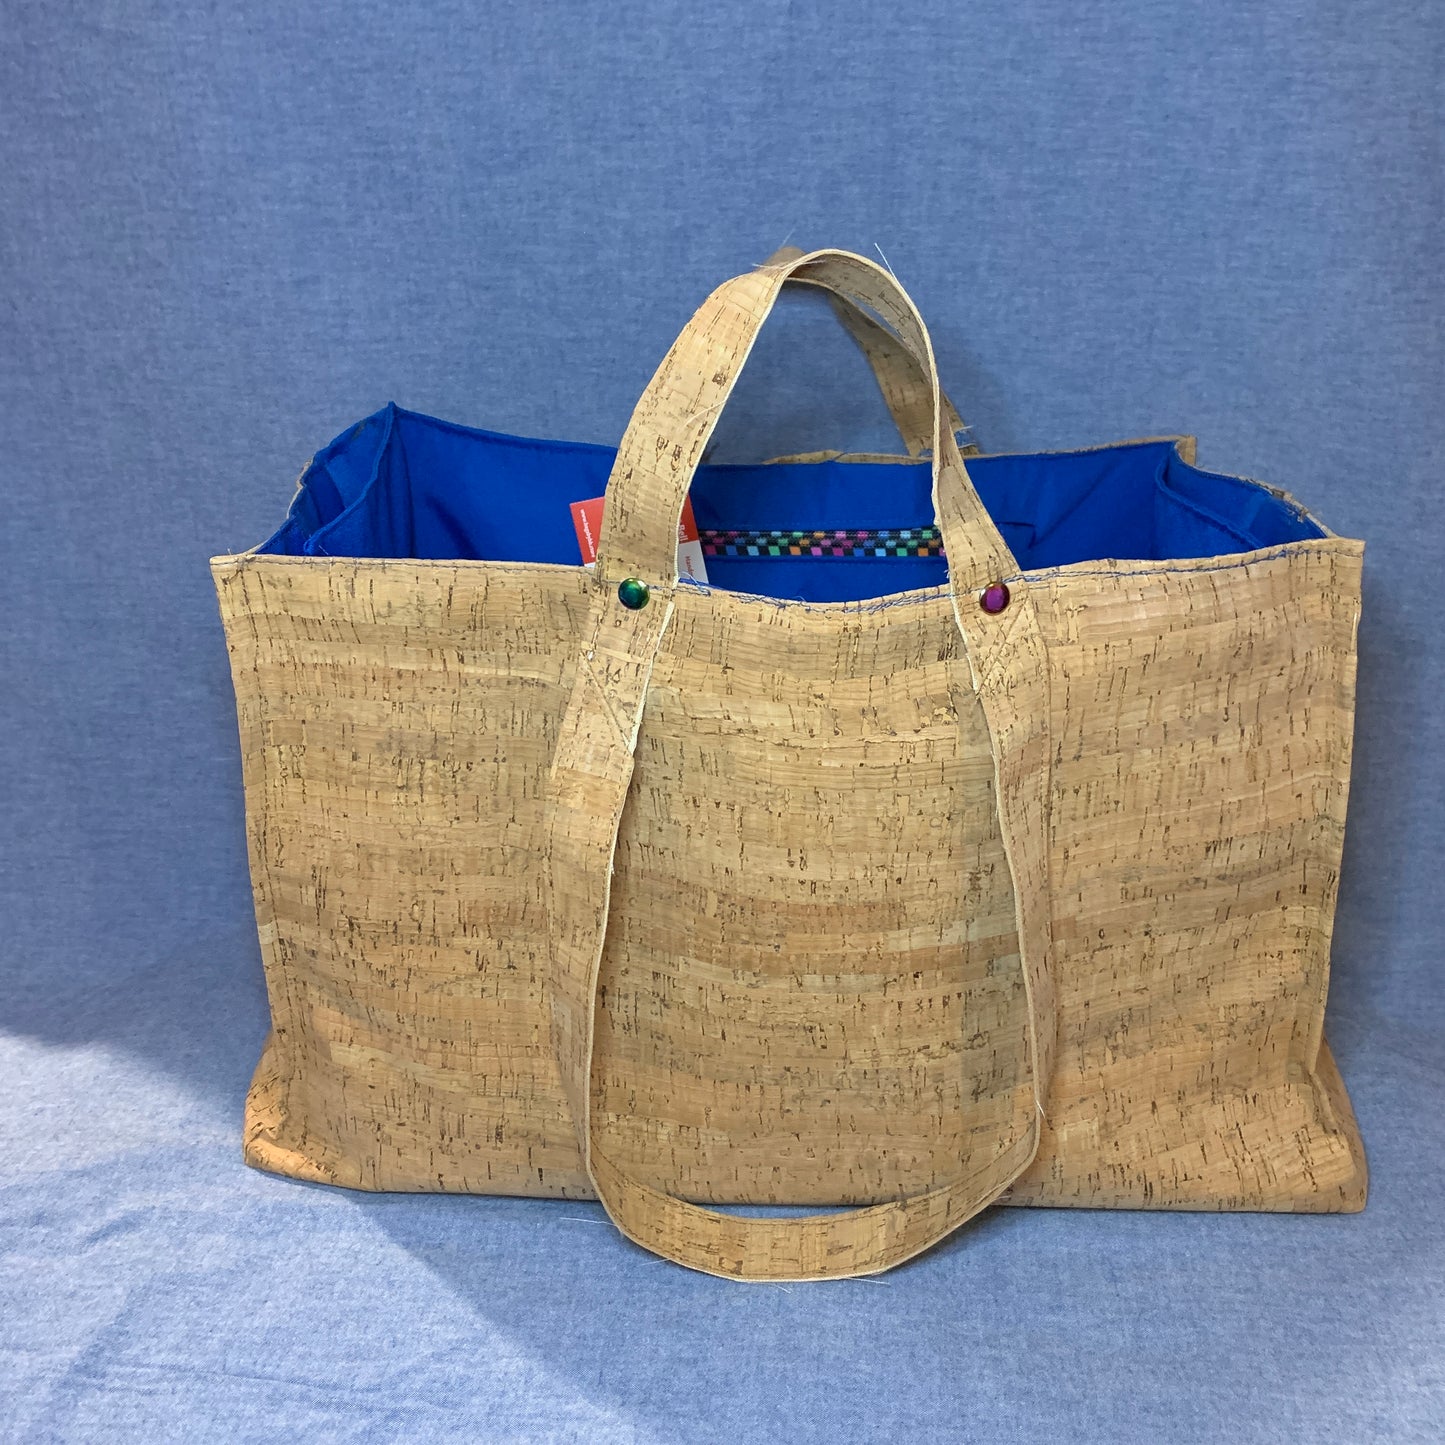 Extra large cork on cork tote carry-all.